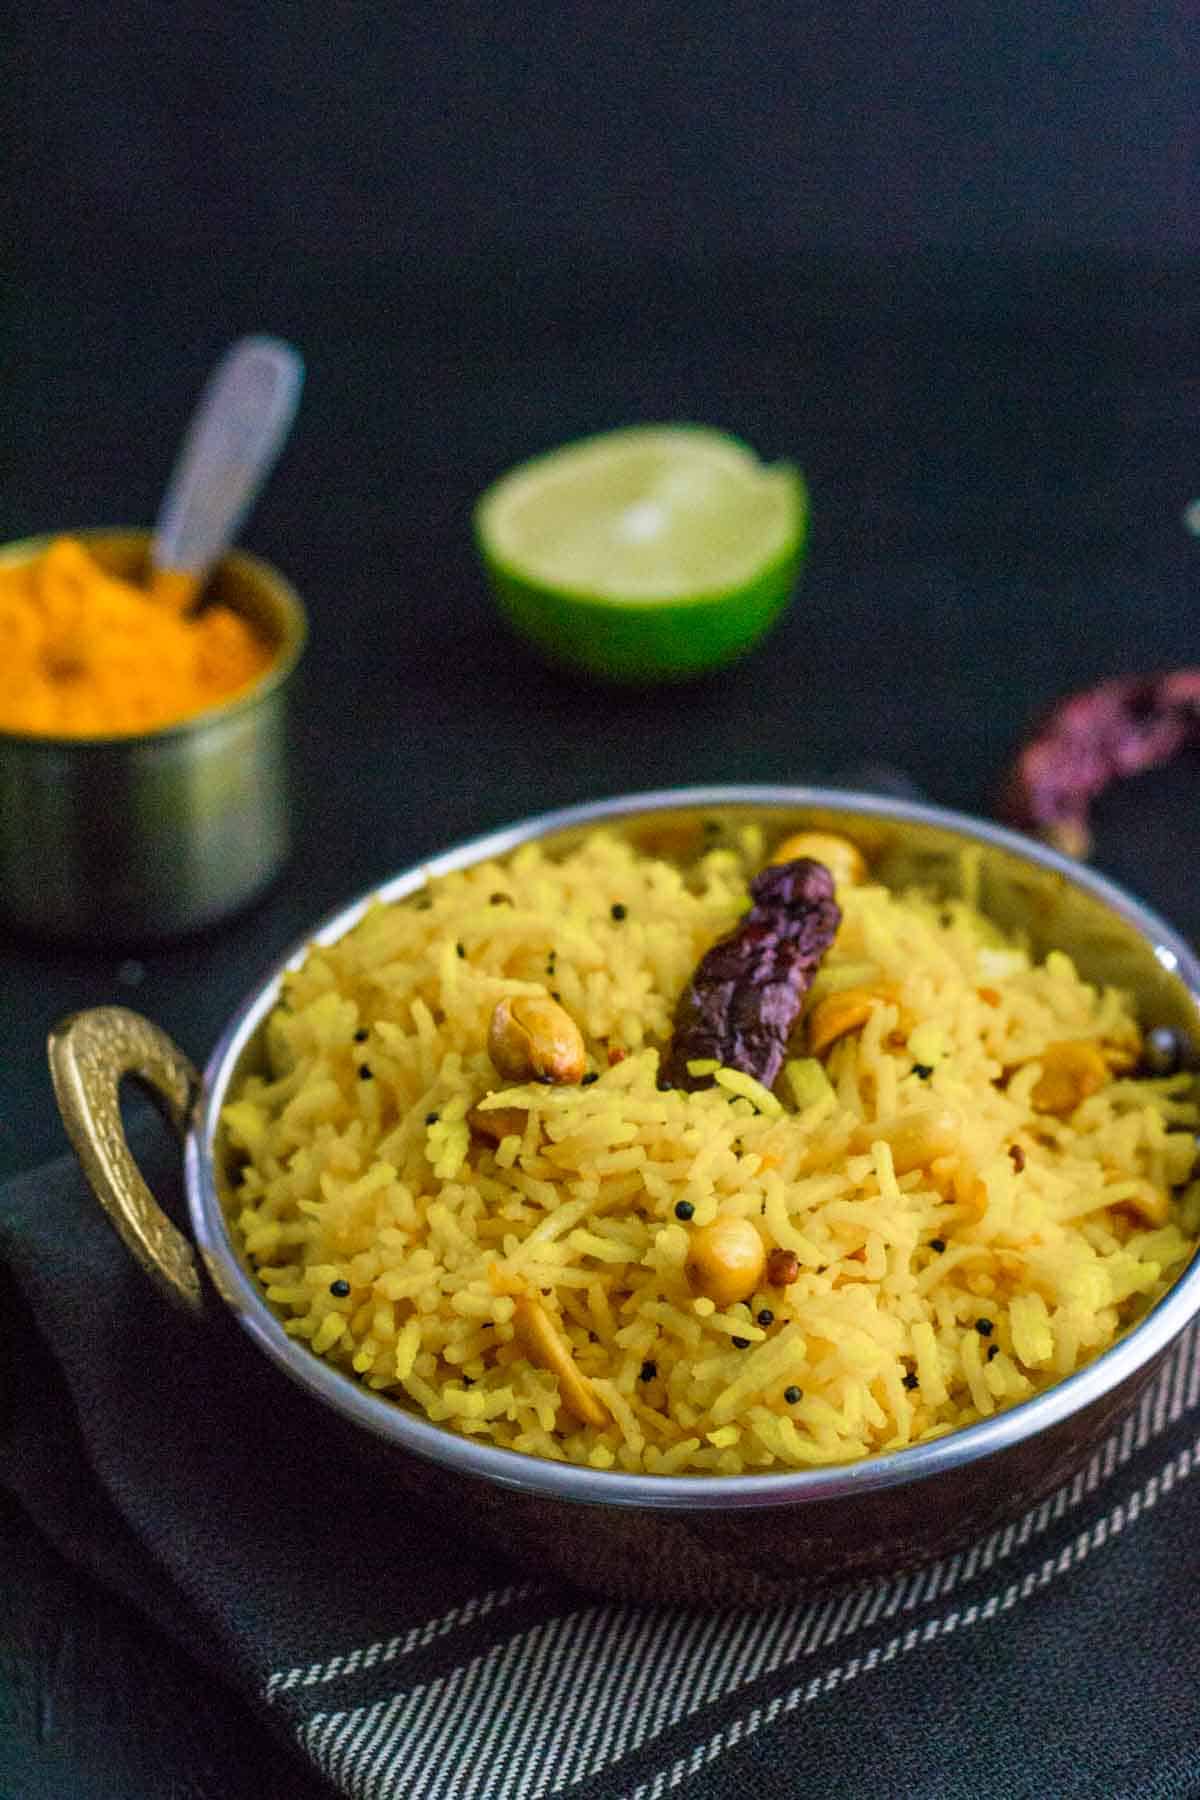 Got leftover rice? Turn it into Lemon rice - a popular and flavorful South Indian dish that you can make in less than 15 minutes. An easy lunch box option that you can put together the night before or in the morning without any fuss.